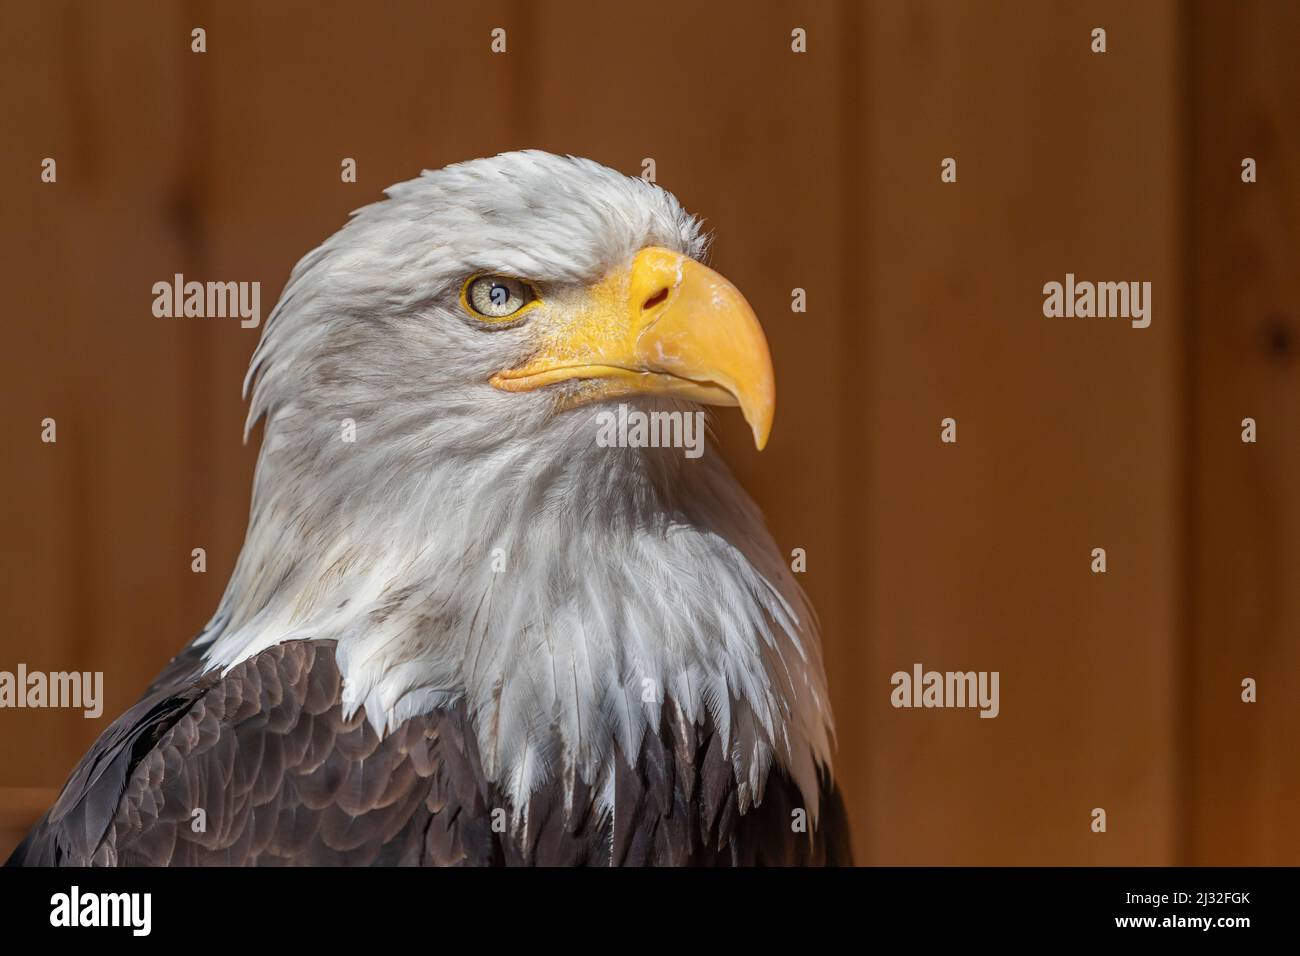 Side portrait of a bald eagle on a dark brown background. The eagle has a colored white head. Stock Photo